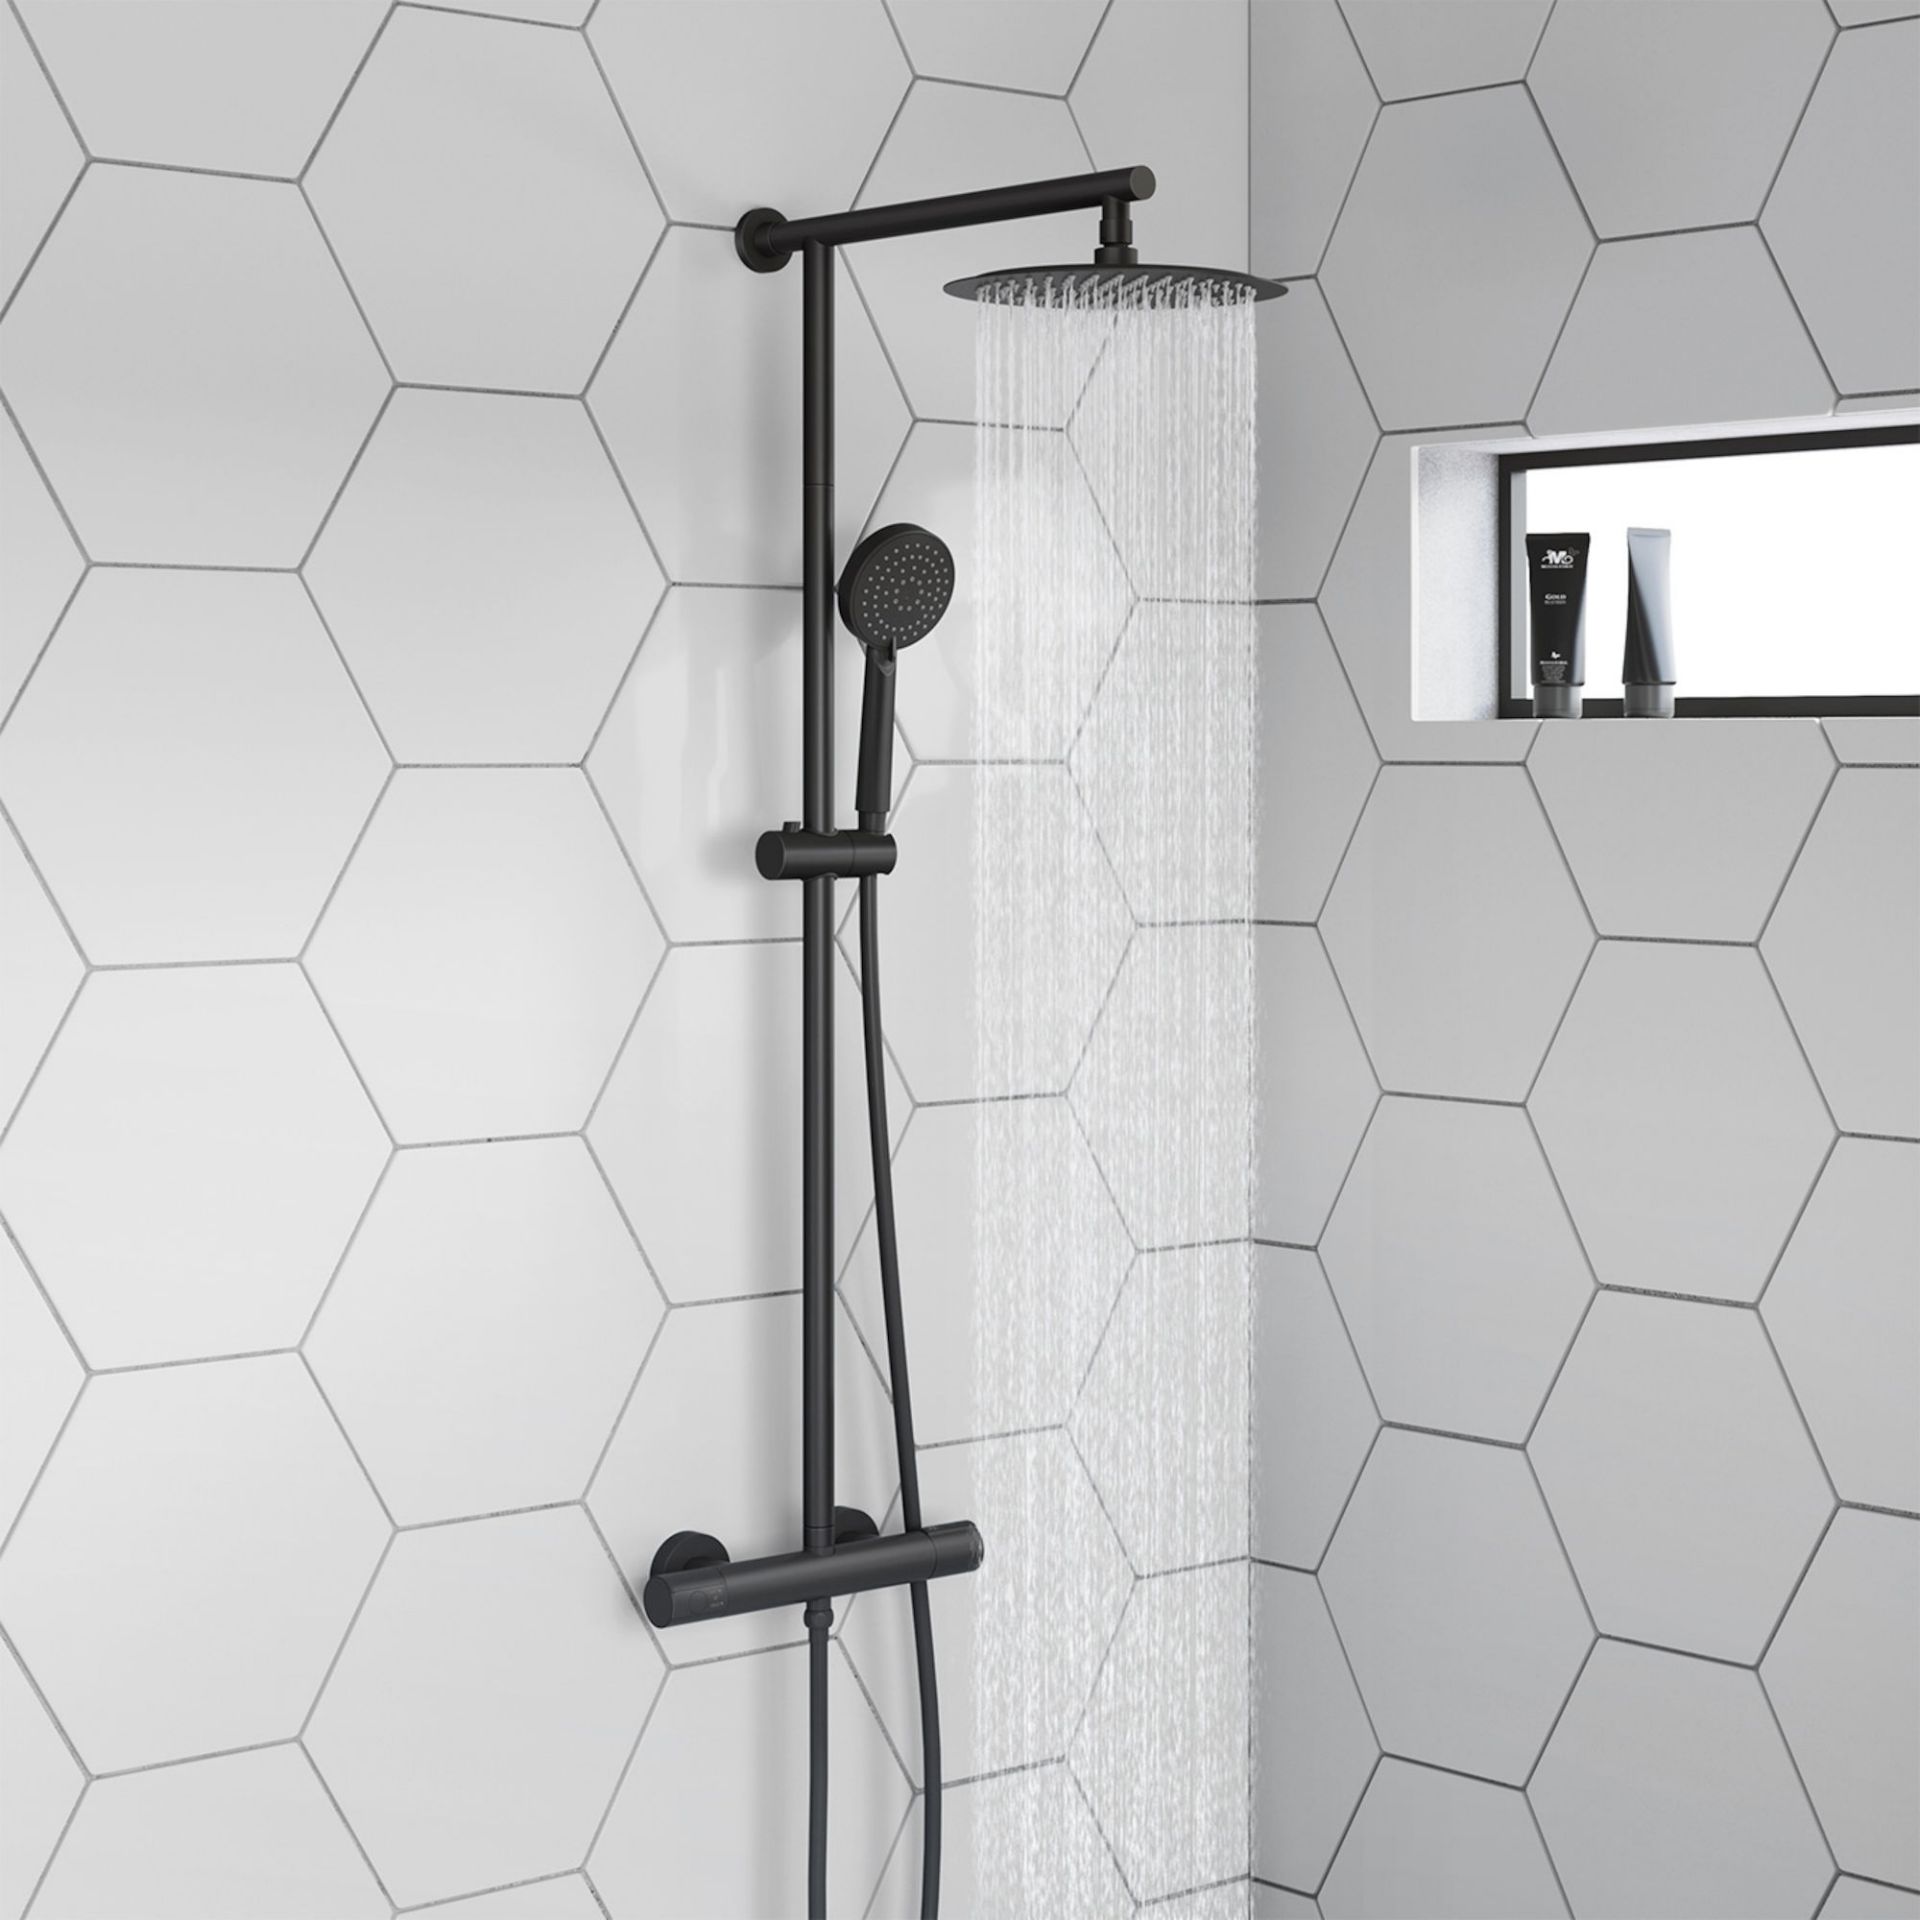 (VN51) Matte Black Round Exposed Thermostatic Shower Kit & Medium Head. Manufactured from long